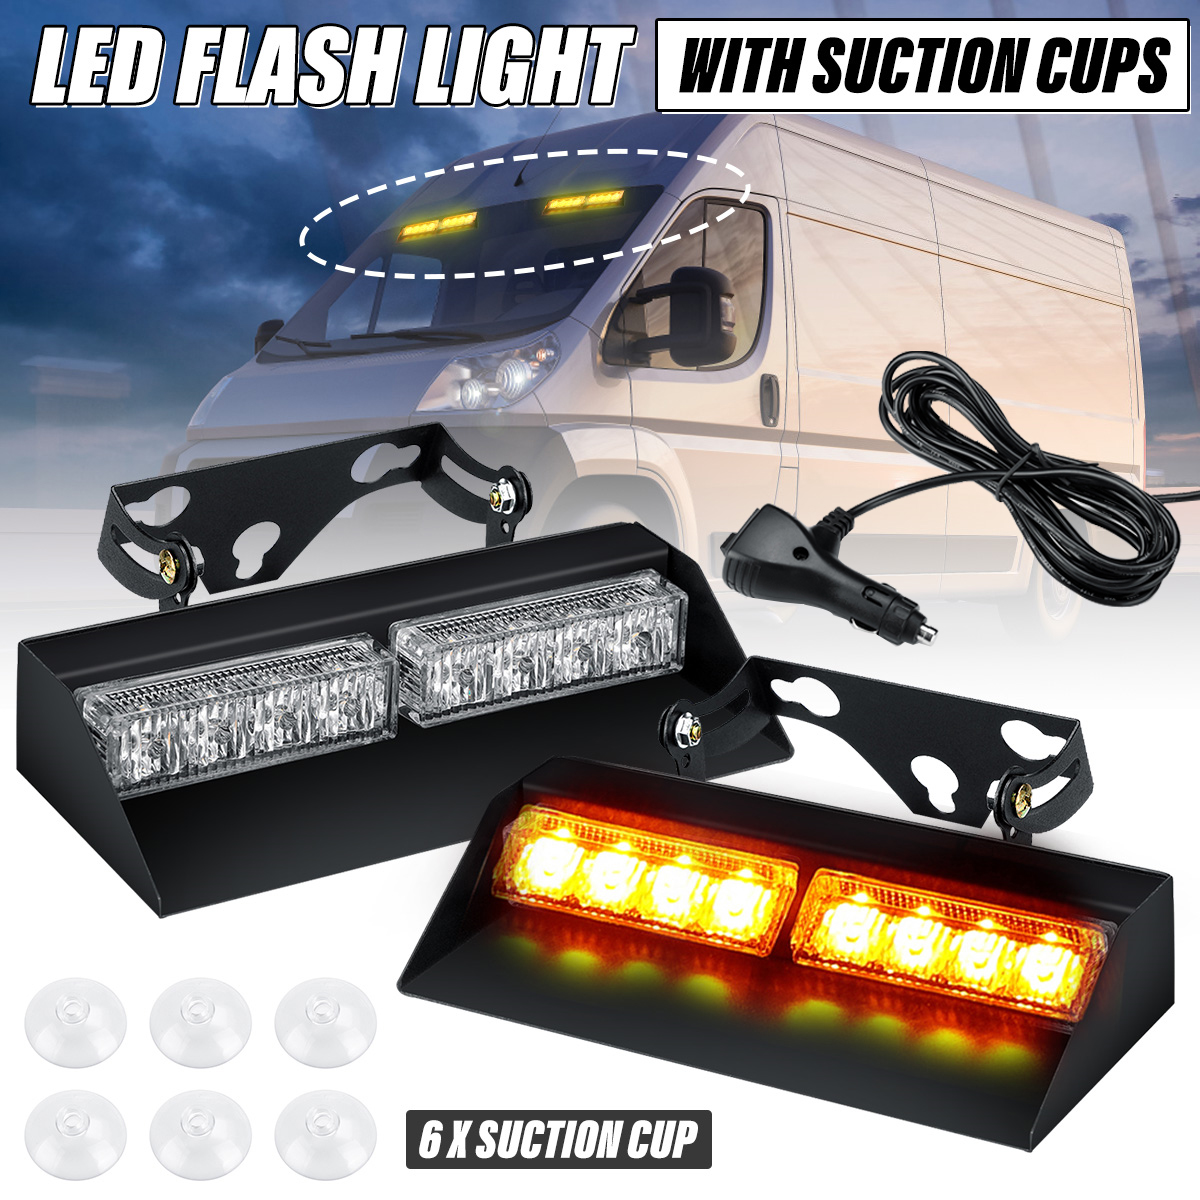 10-30V Emergency Strobe Lights 27 Mode Interior Windshield Lamp With Suction Cups For Trucks